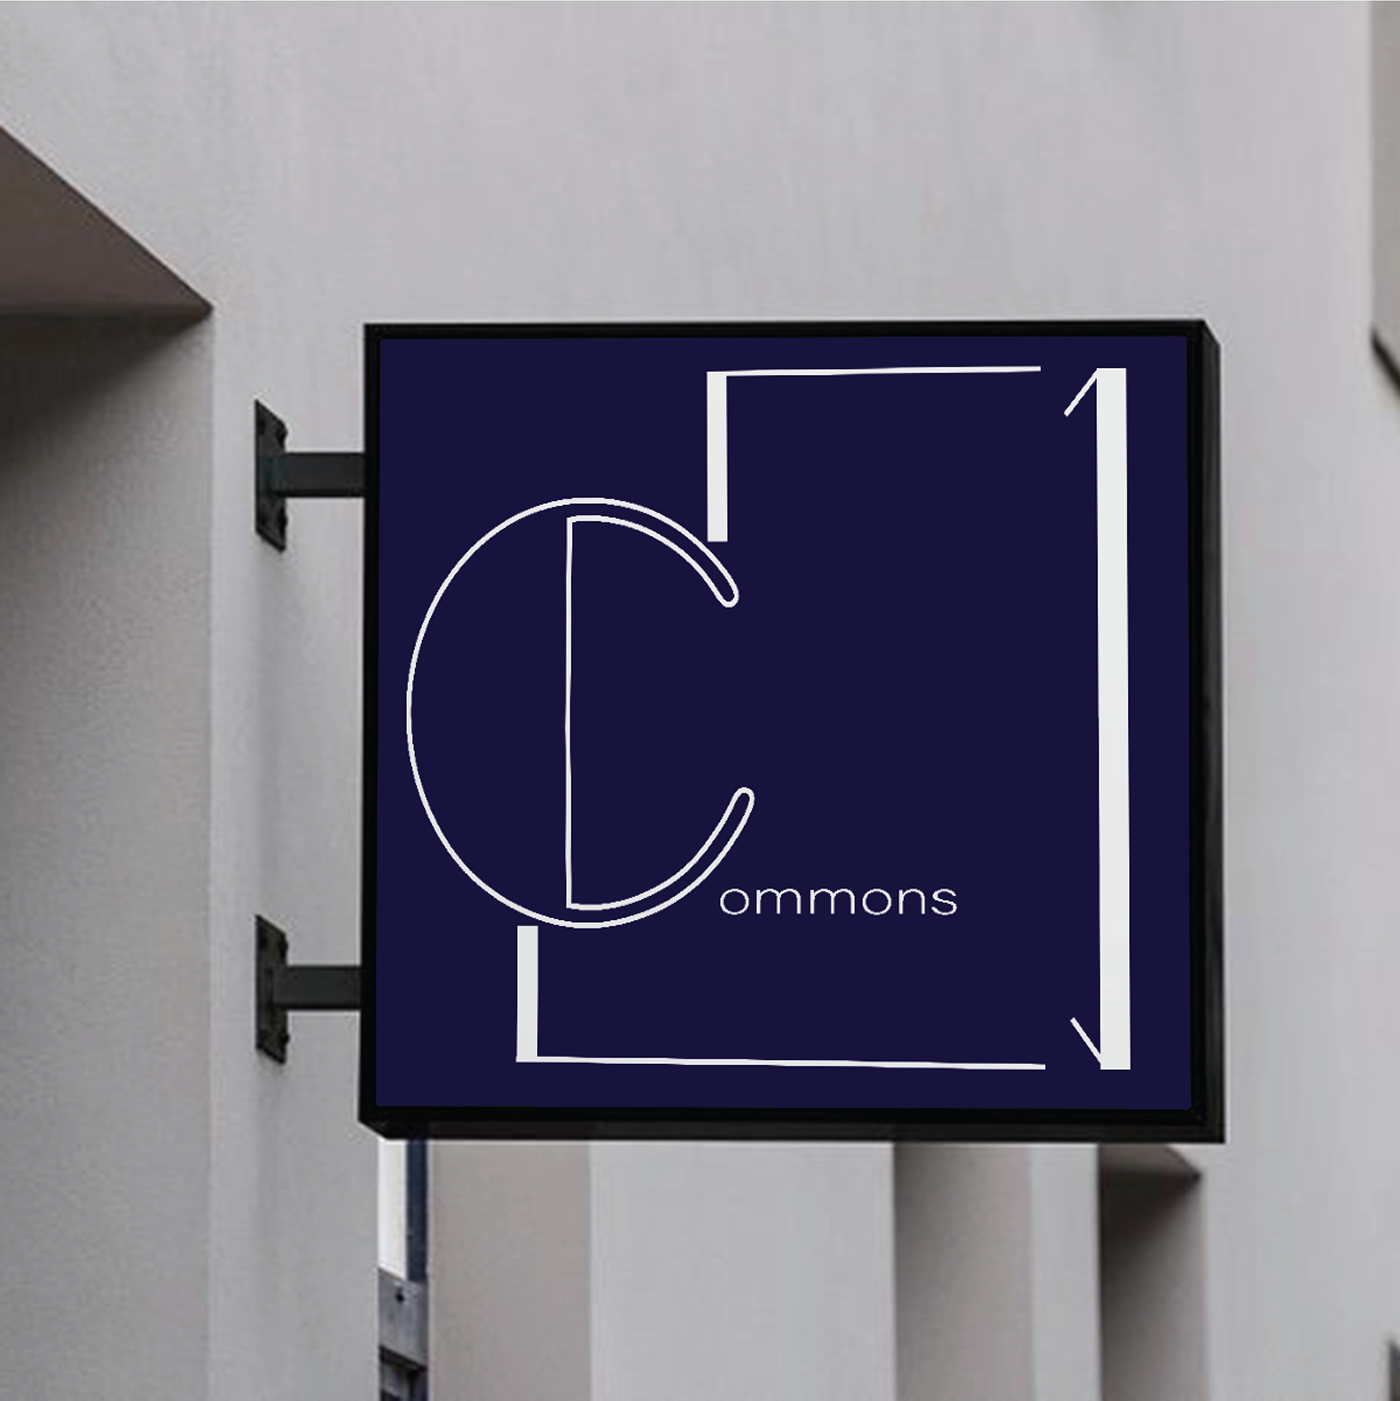 Brand identity for The commons co-working space.